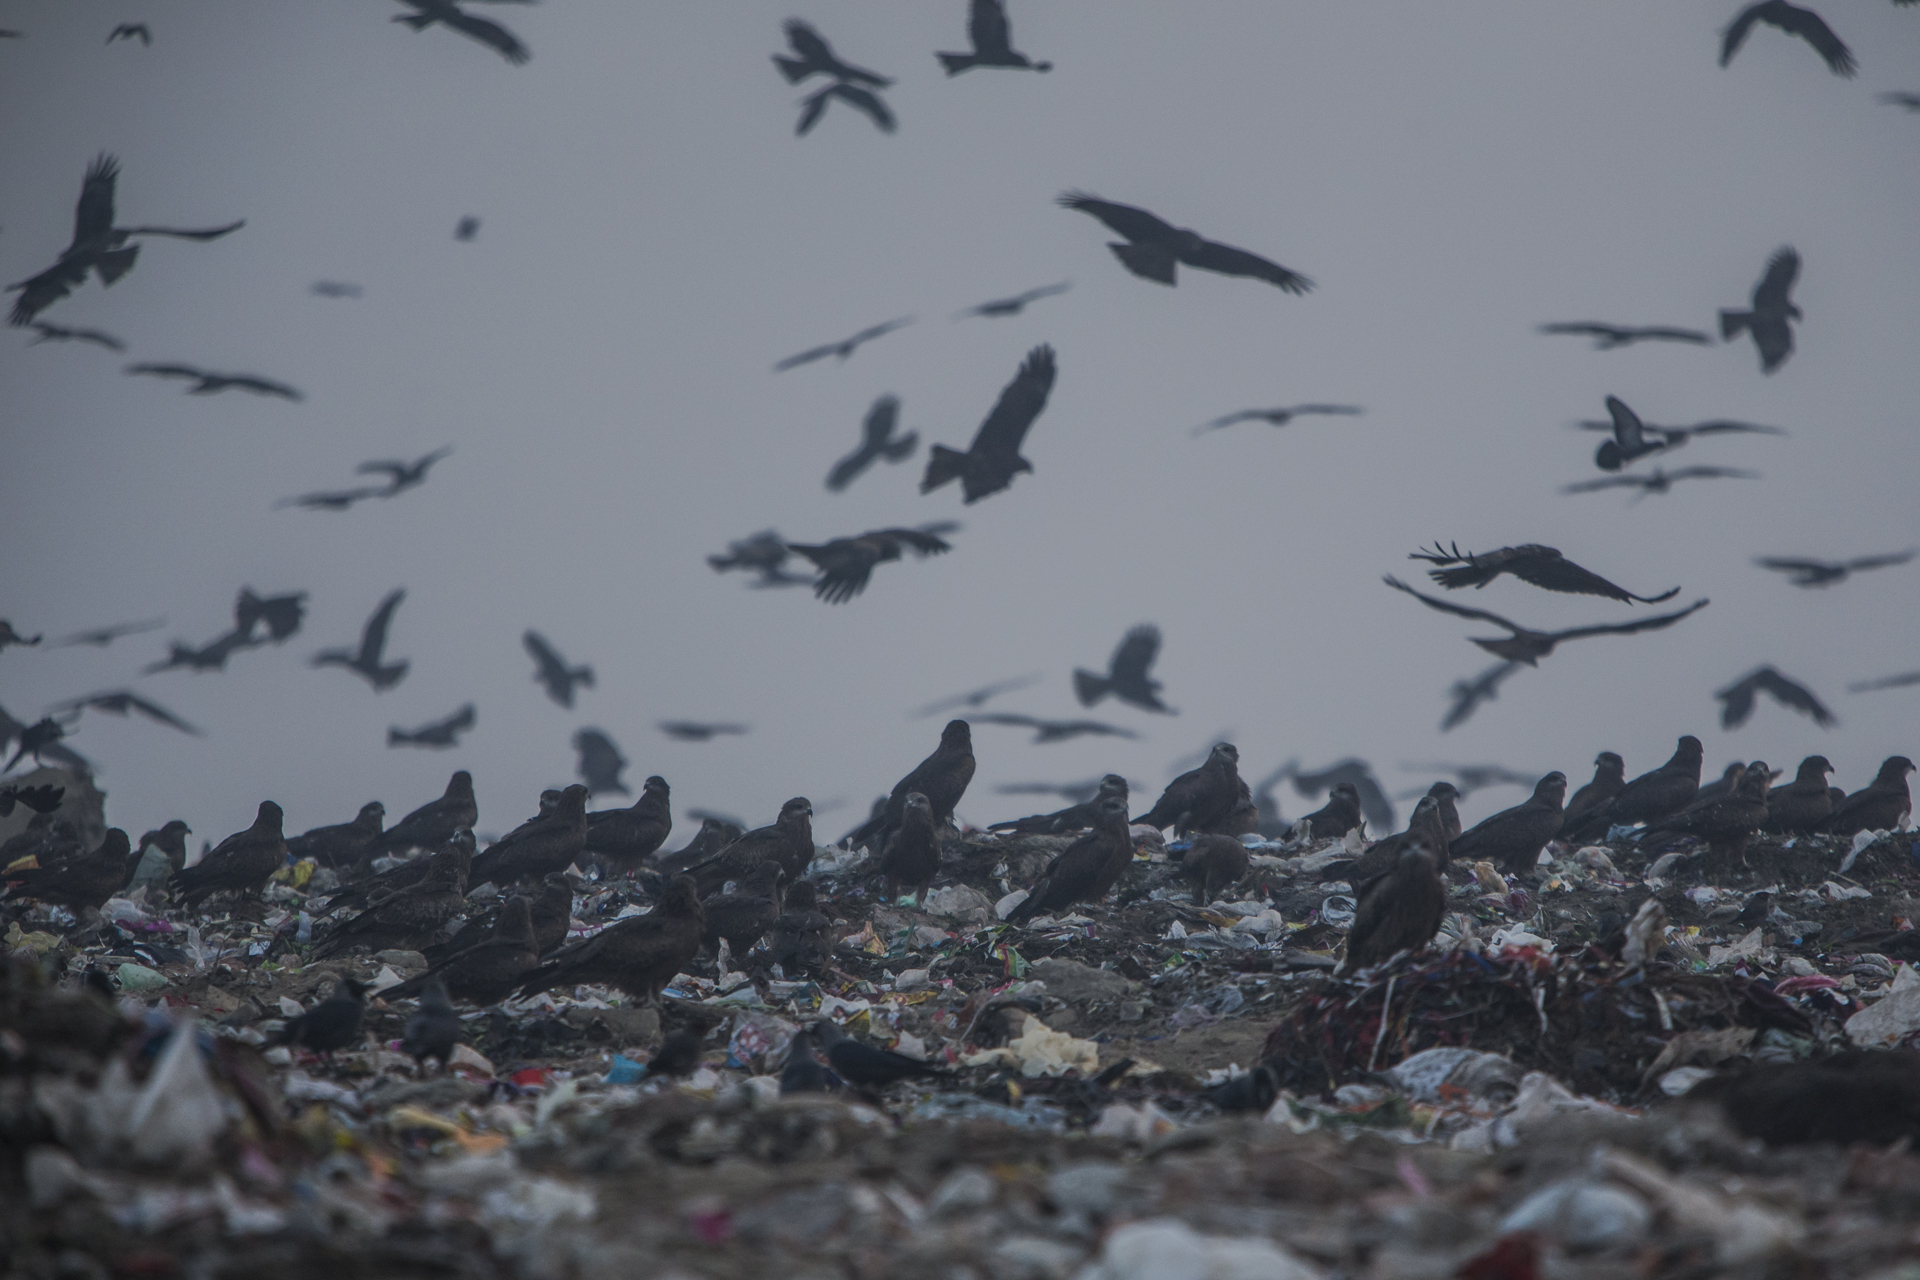  However, many of the kites scavenge from the huge dumps, eating scraps that have little nutritional value.&nbsp; 